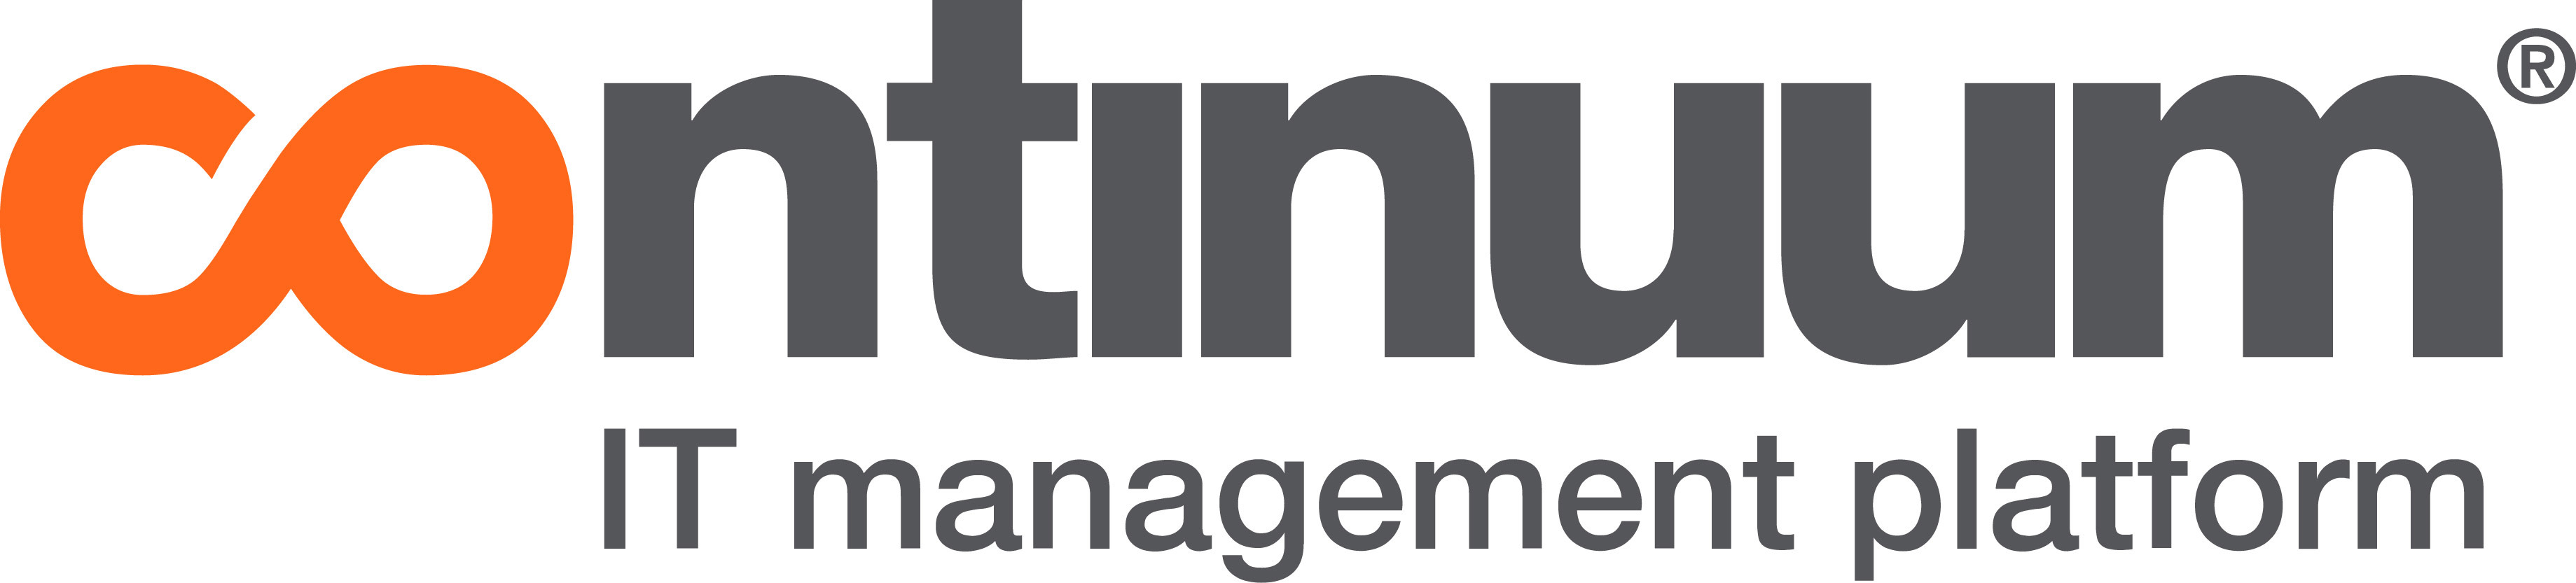 Continuum Names Vice President Of Help Desk Business Wire